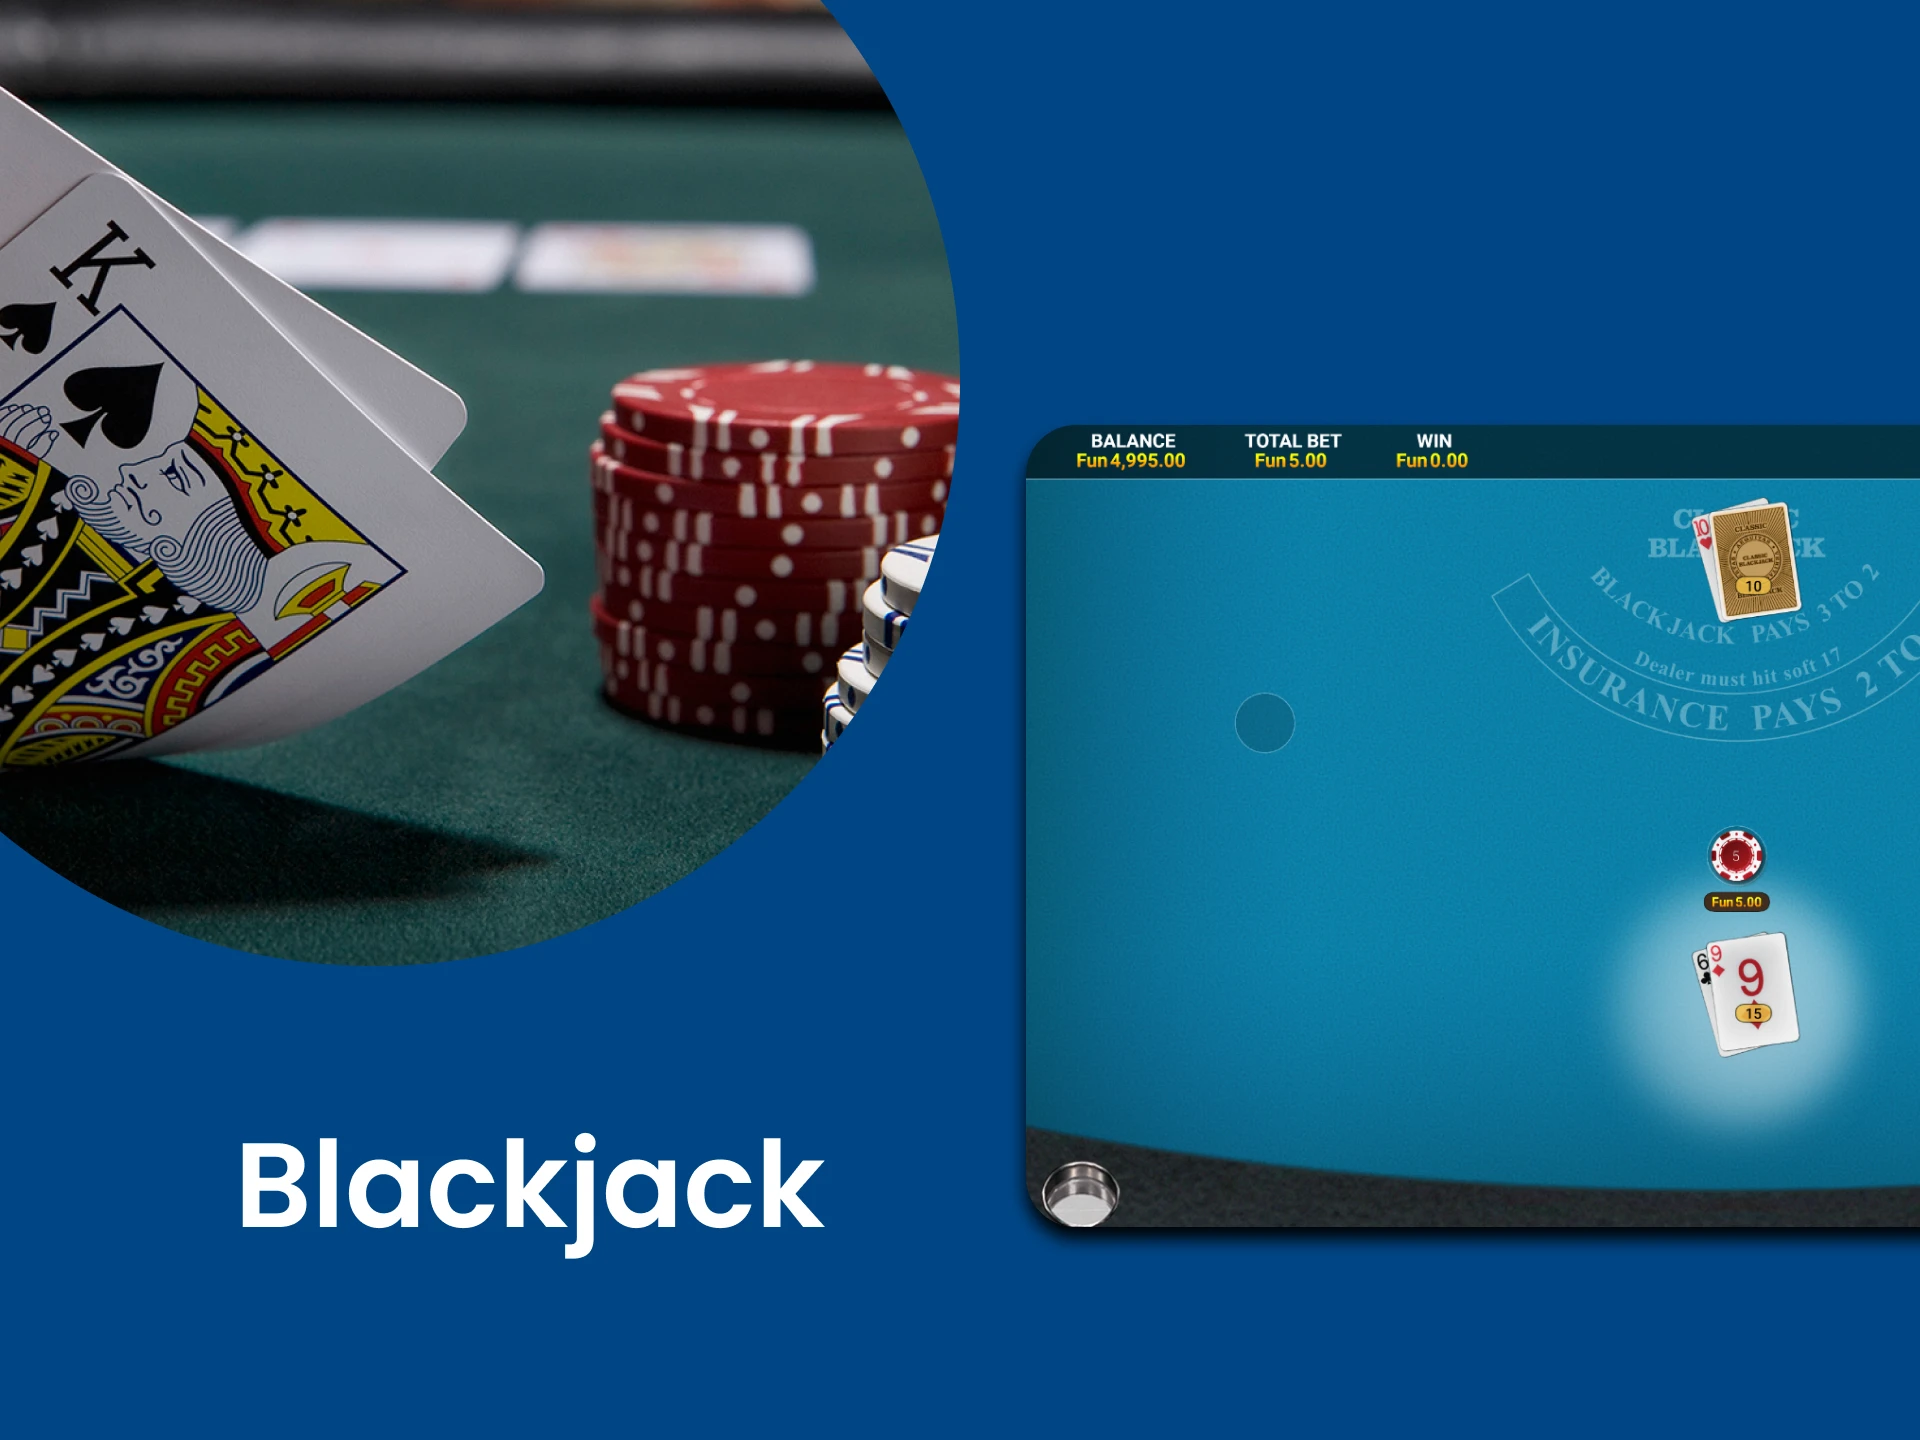 Select the Blackjack section for casino games.